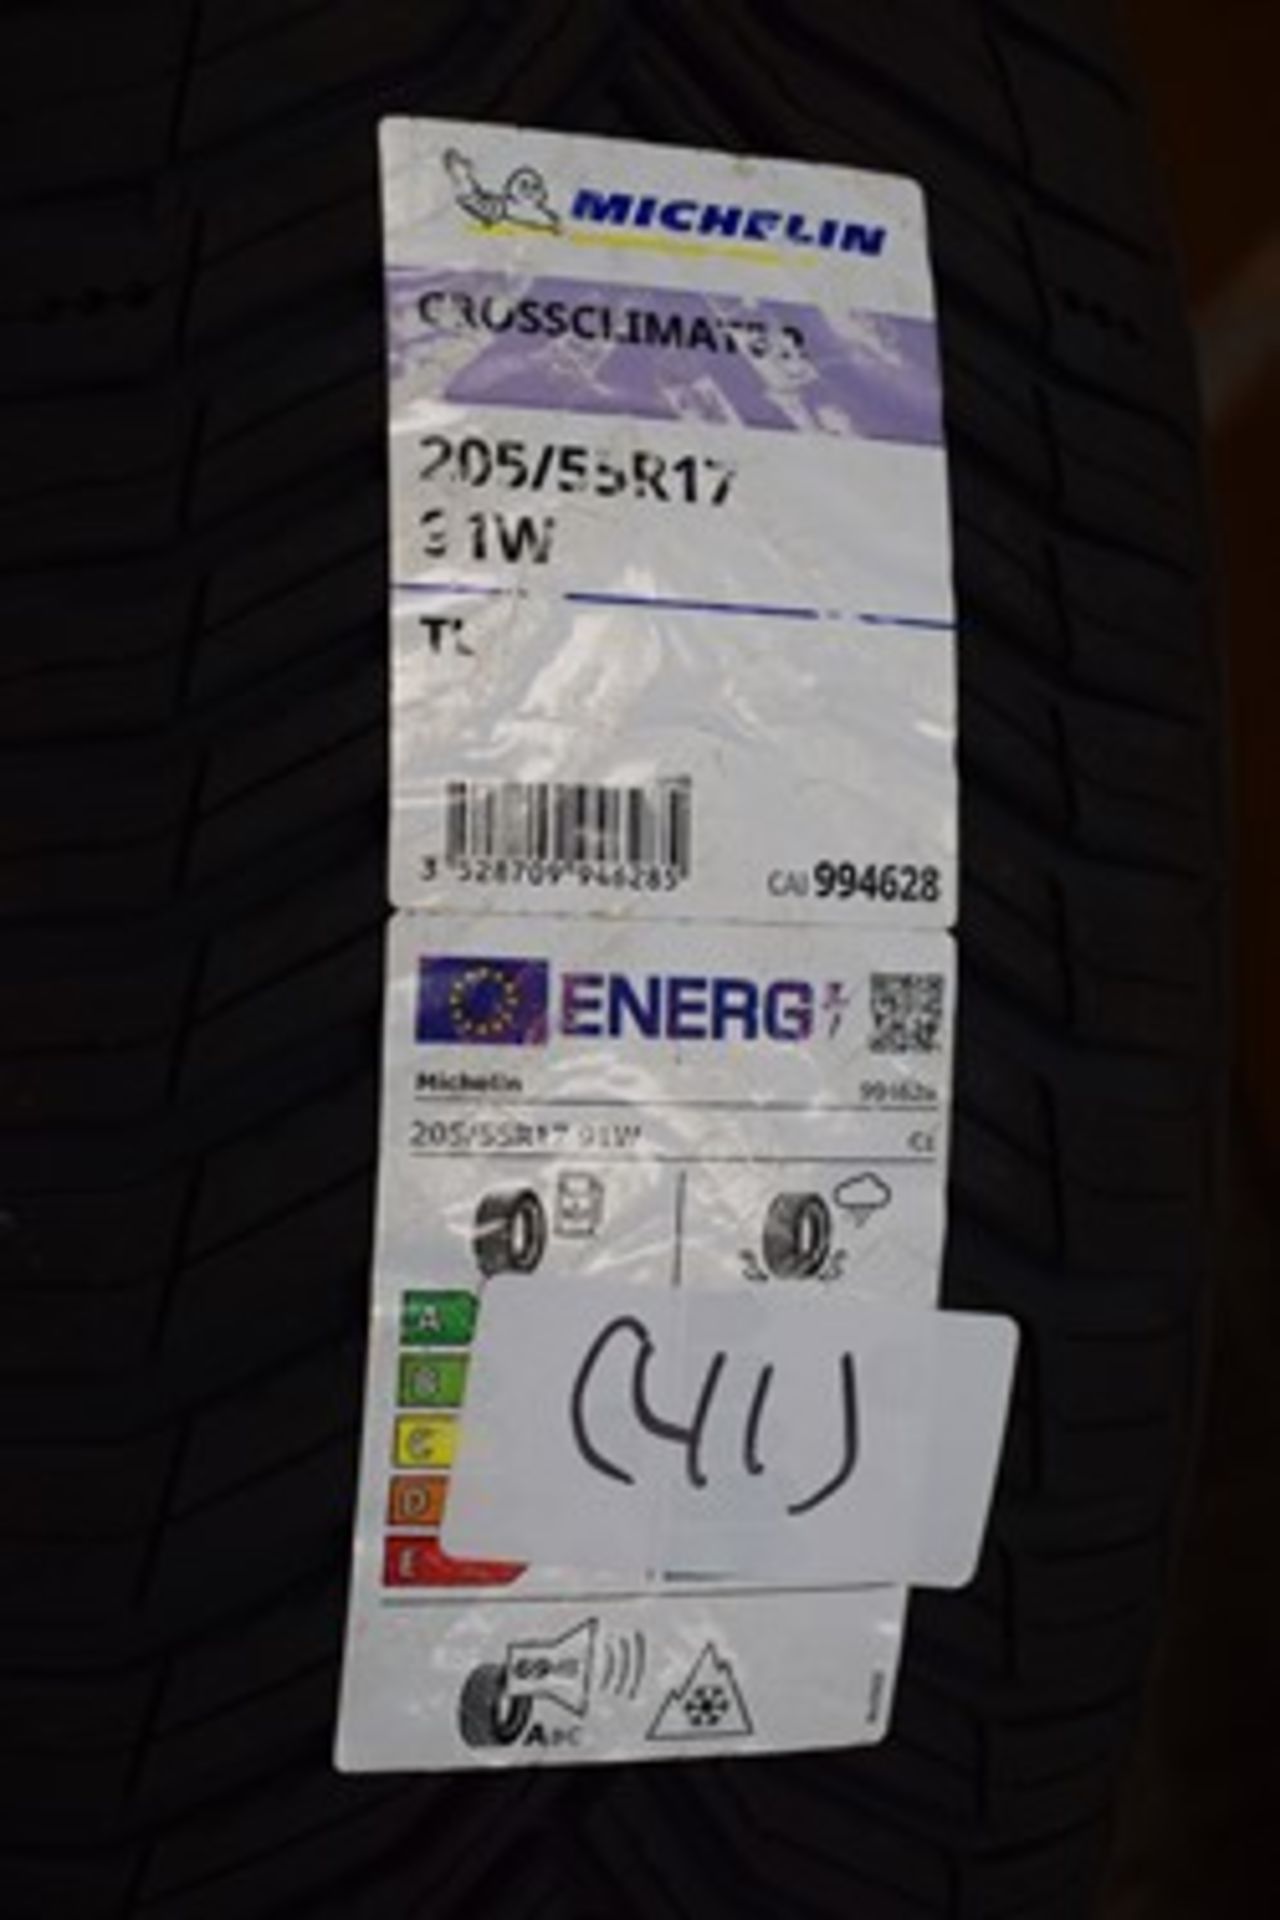 1 x Michelin Cross Climate 2 tyre, size 205/55R17 91W TL - new with label (C4)(41)